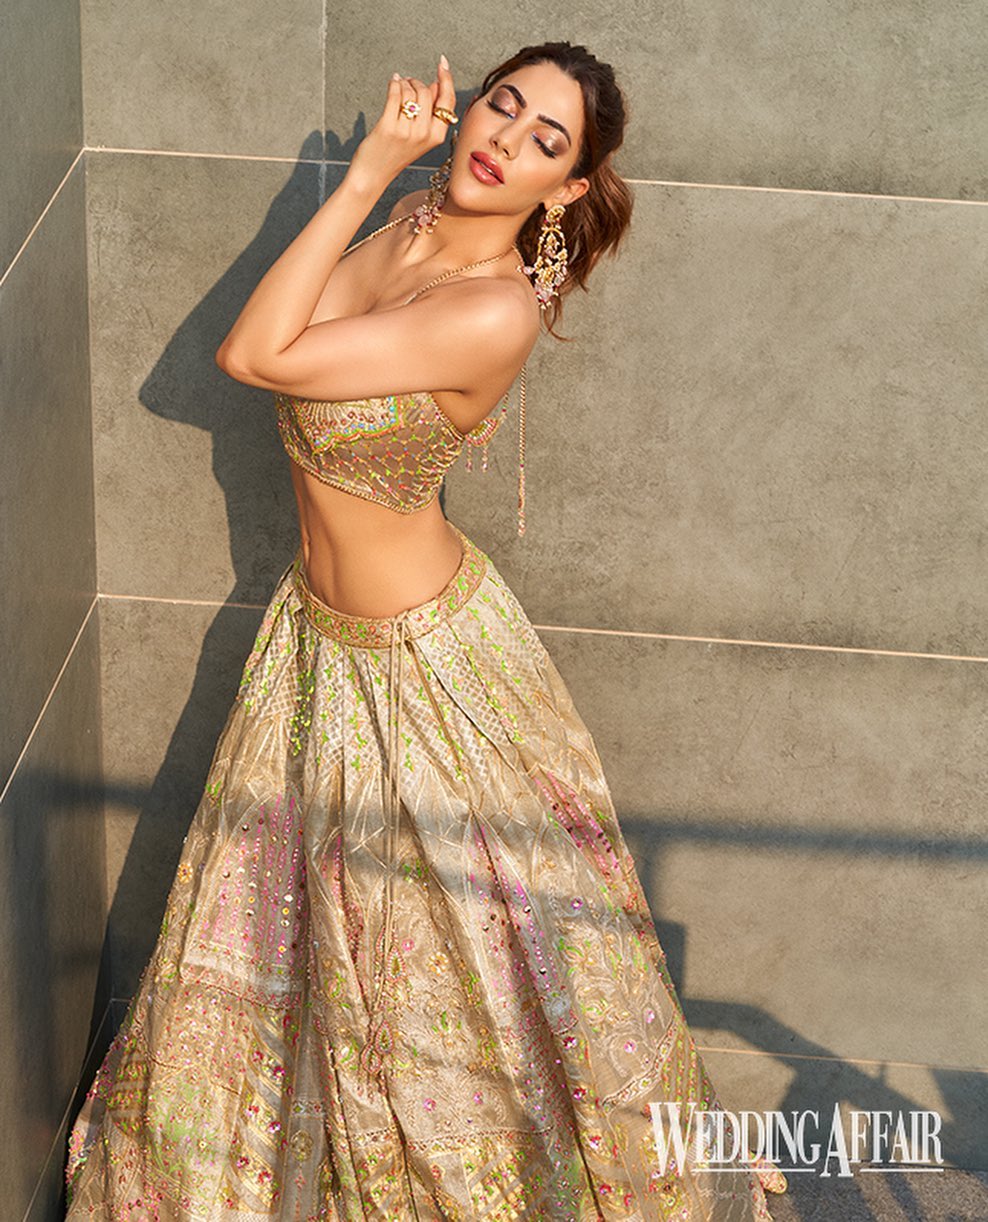 Nikki Tamboli Latest Video: Nikki Tamboli gives Indian saree a twist by  sporting blouse with plunging neckline and heavy jewellery, See PHOTOS